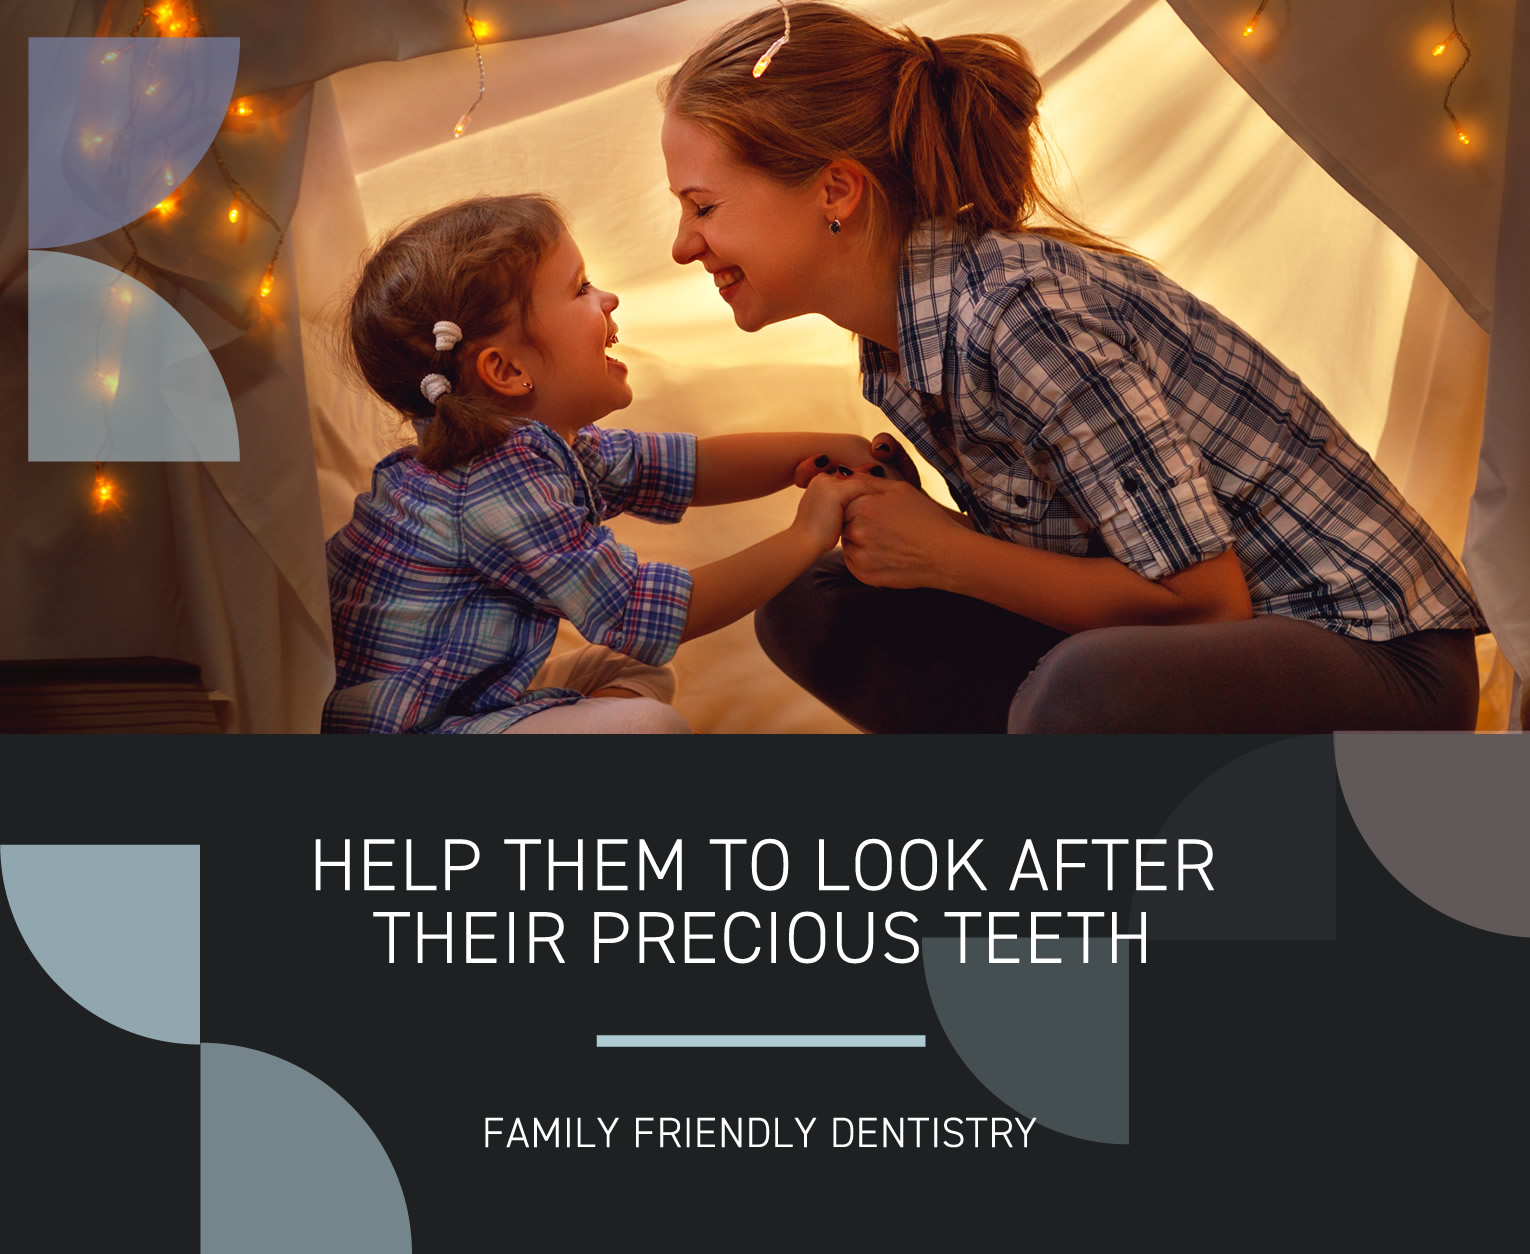 Family treatments at Gentle Dental